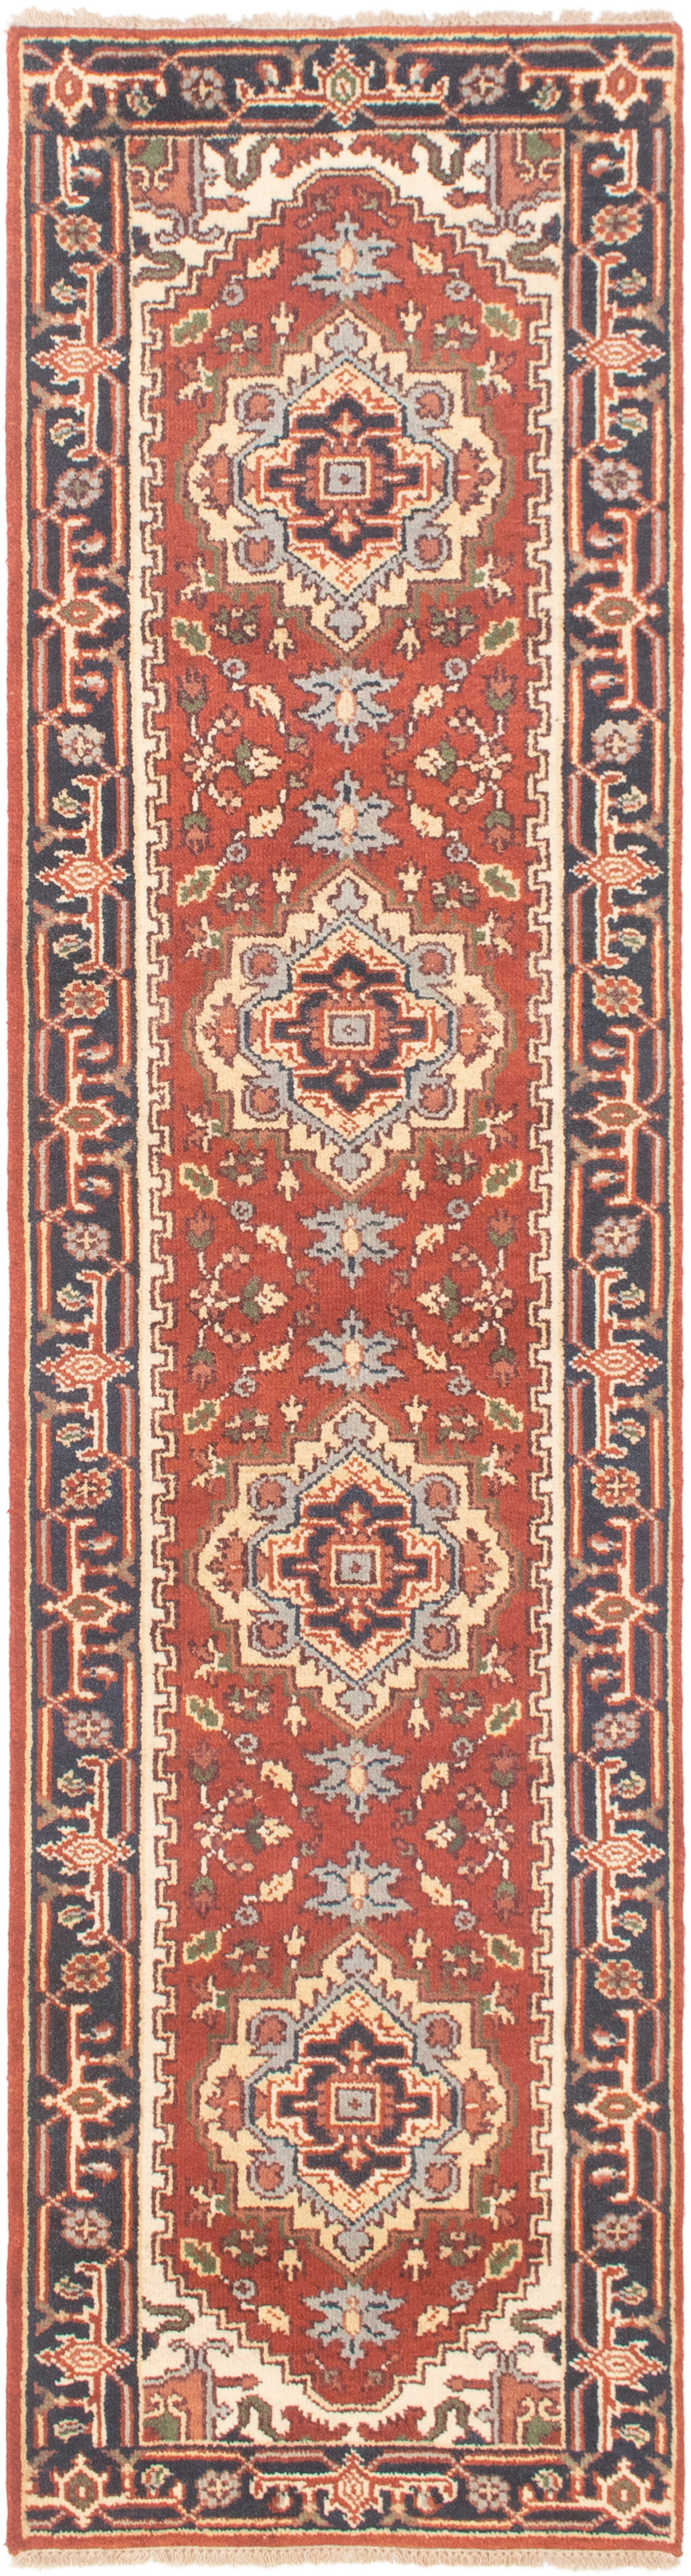 Hand-knotted Serapi Heritage Dark Red Wool Rug 2'6" x 10'0"  Size: 2'6" x 10'0"  